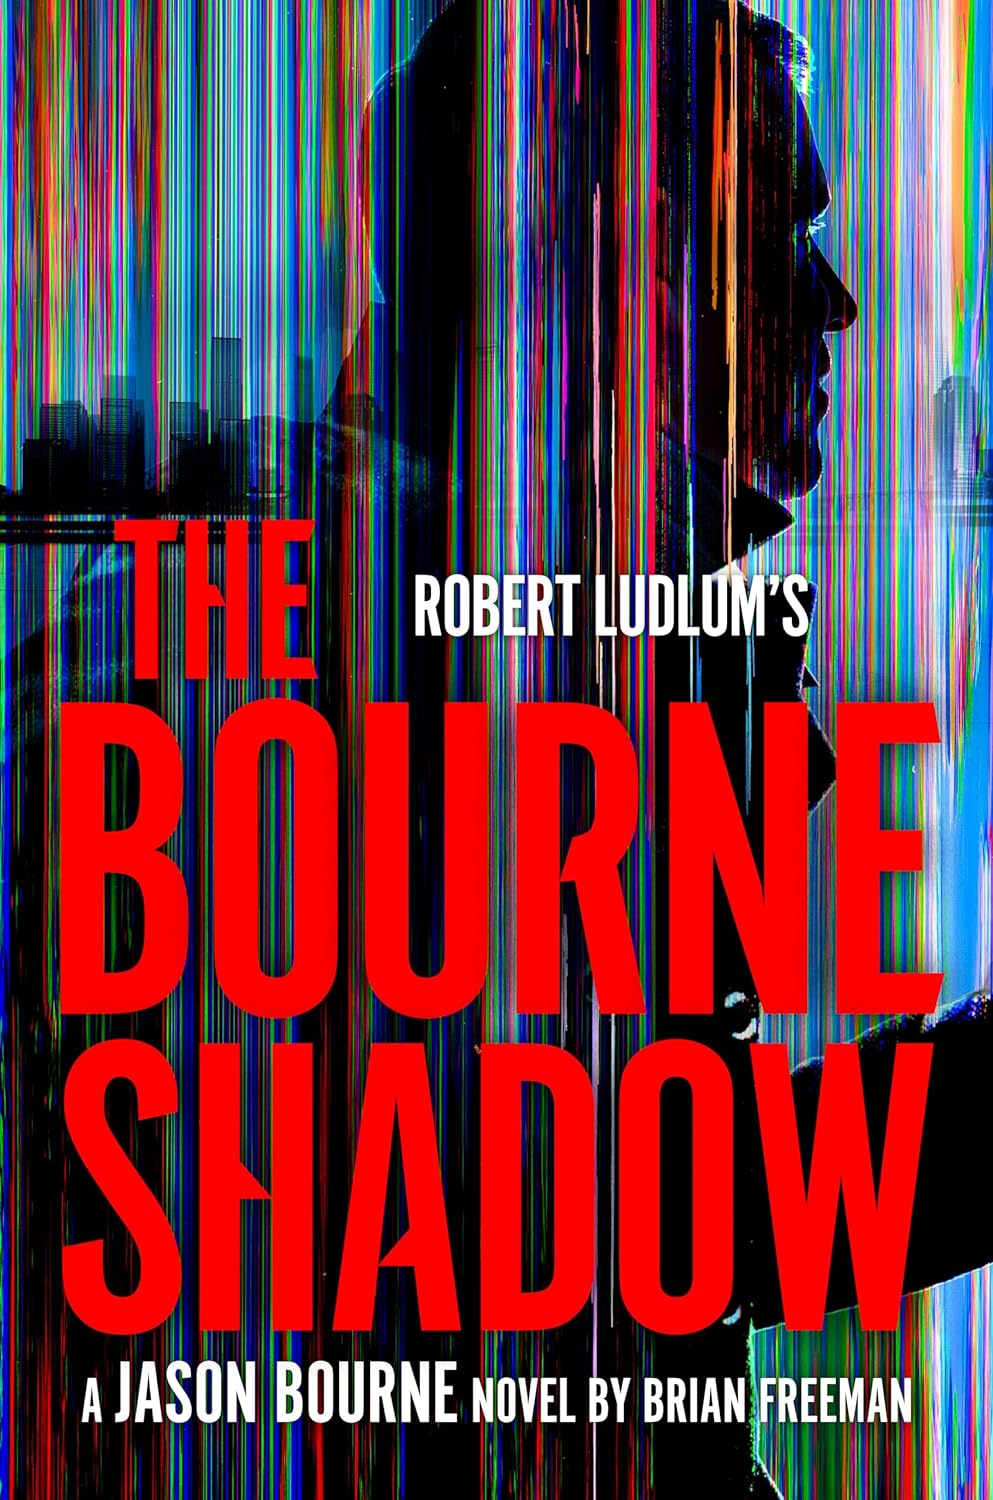 Image for "Robert Ludlum's The Bourne Shadow"